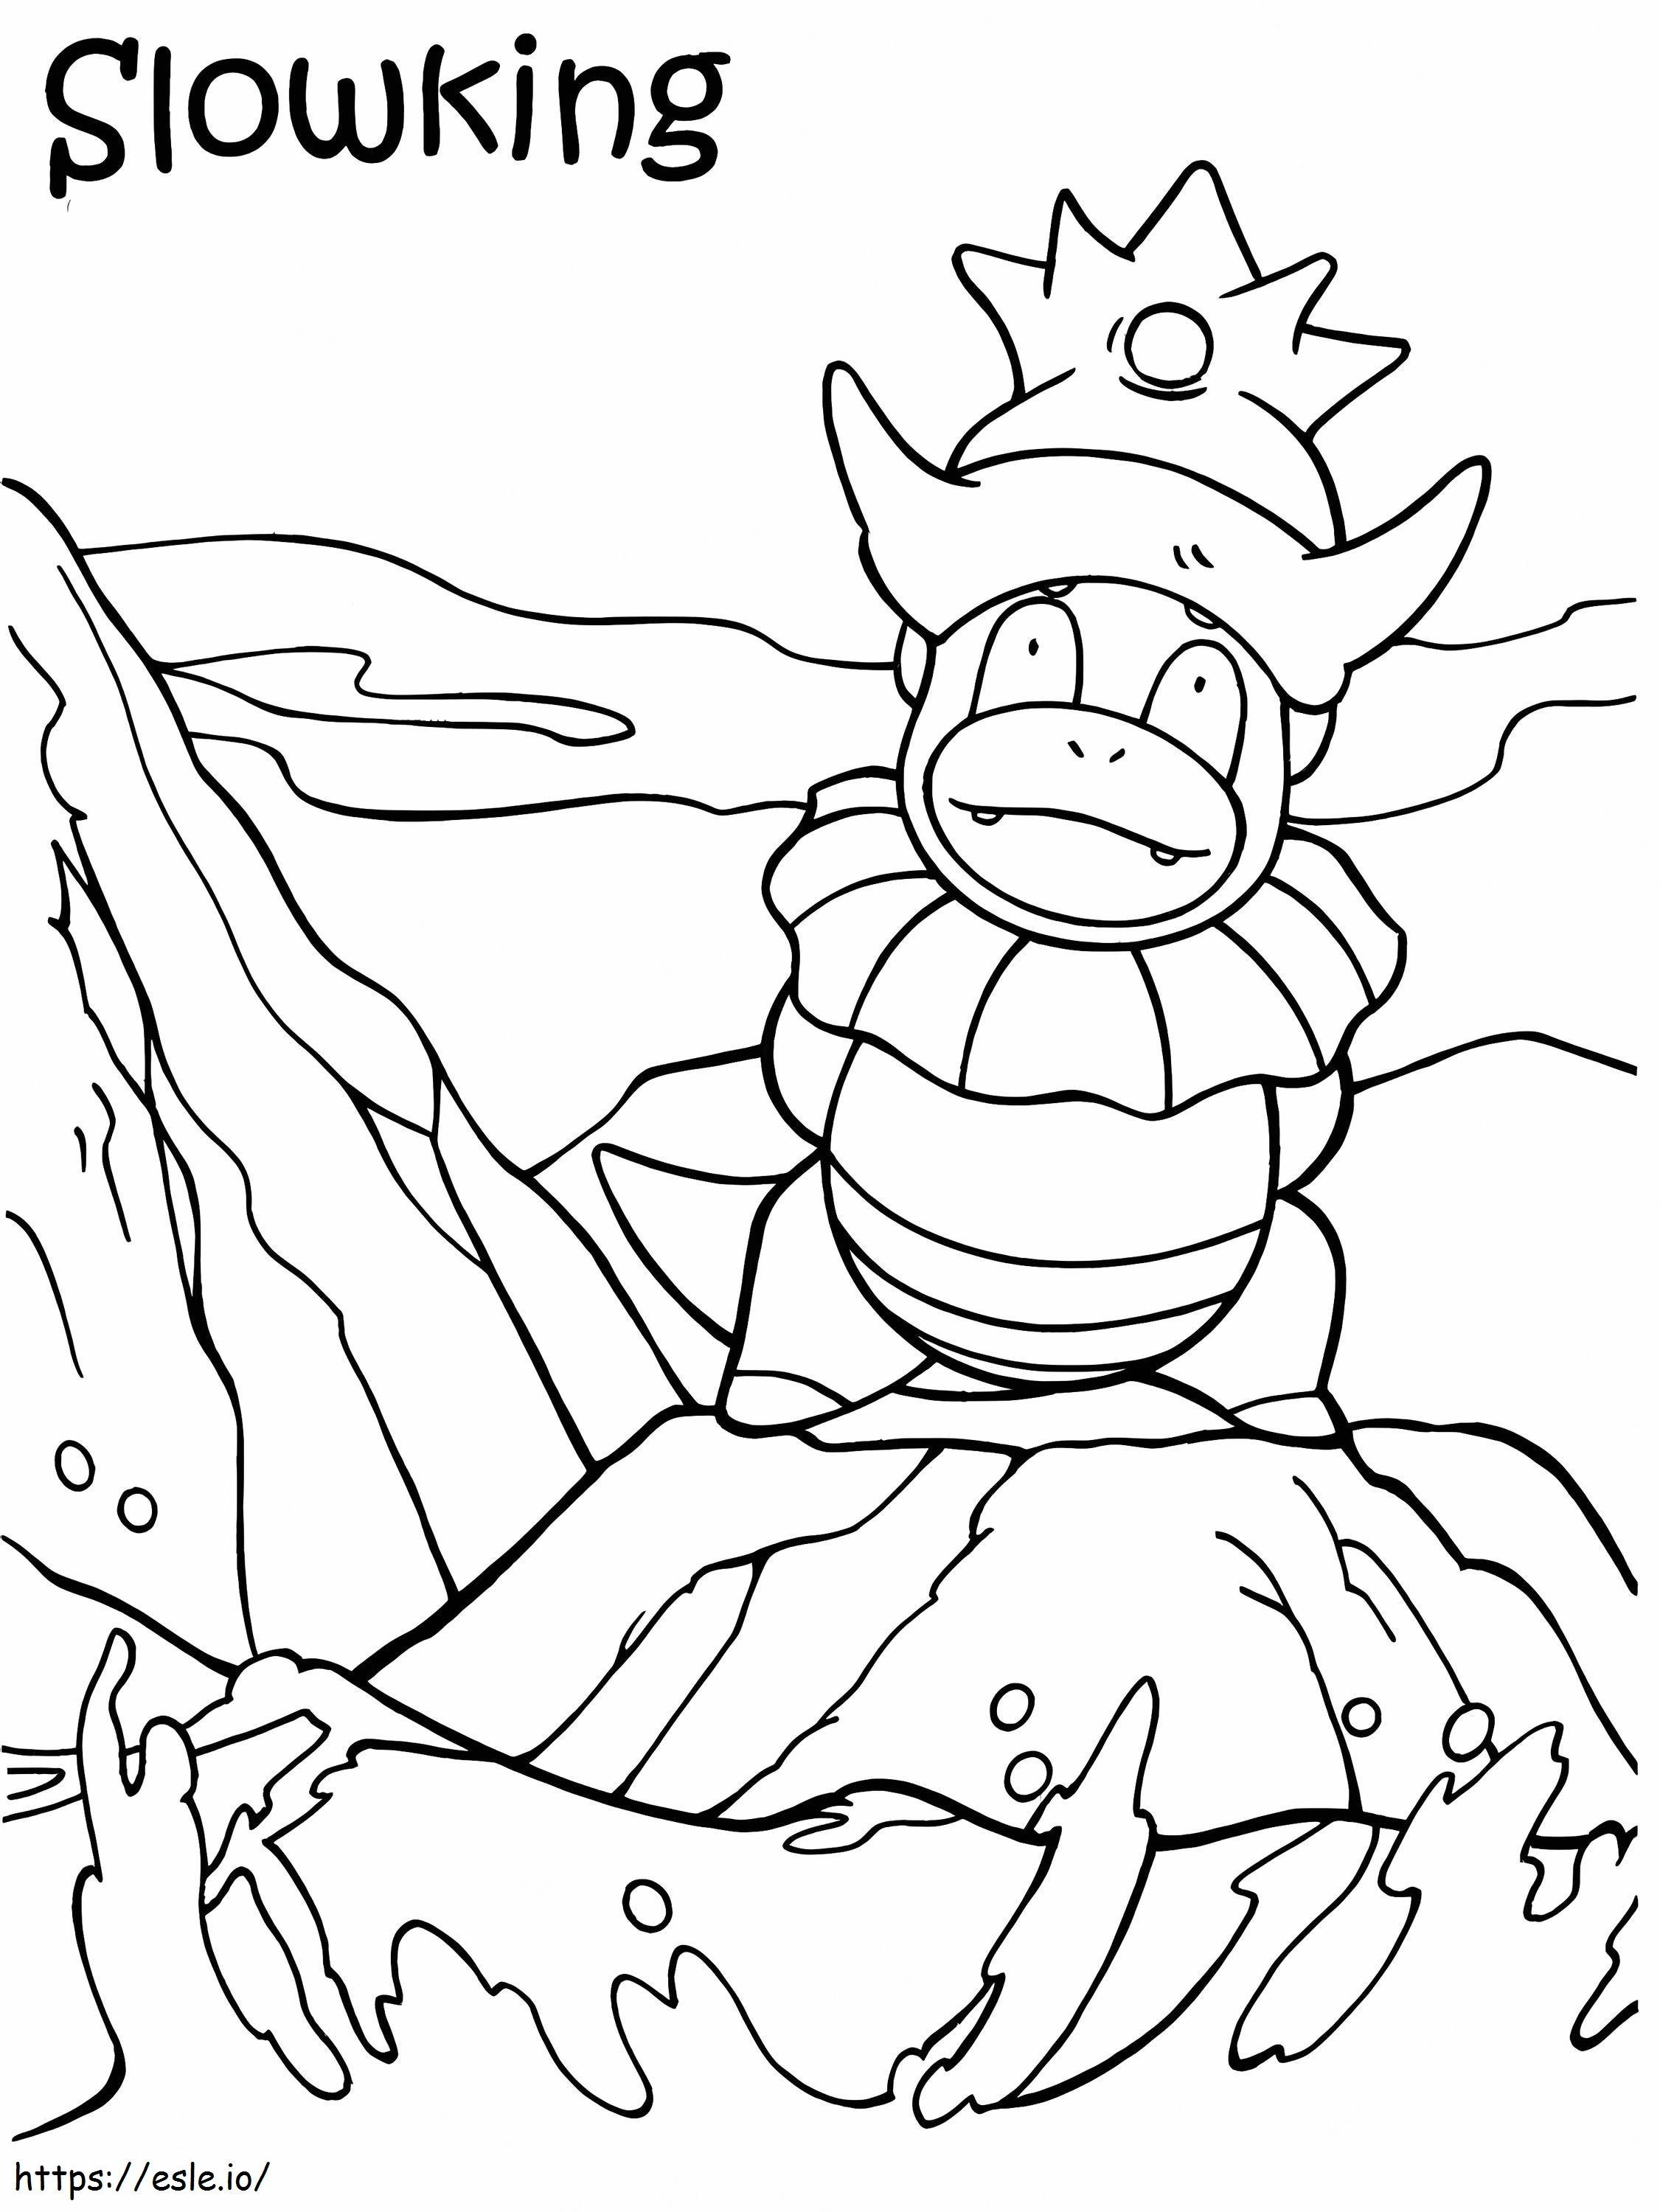 Printable Slowking coloring page